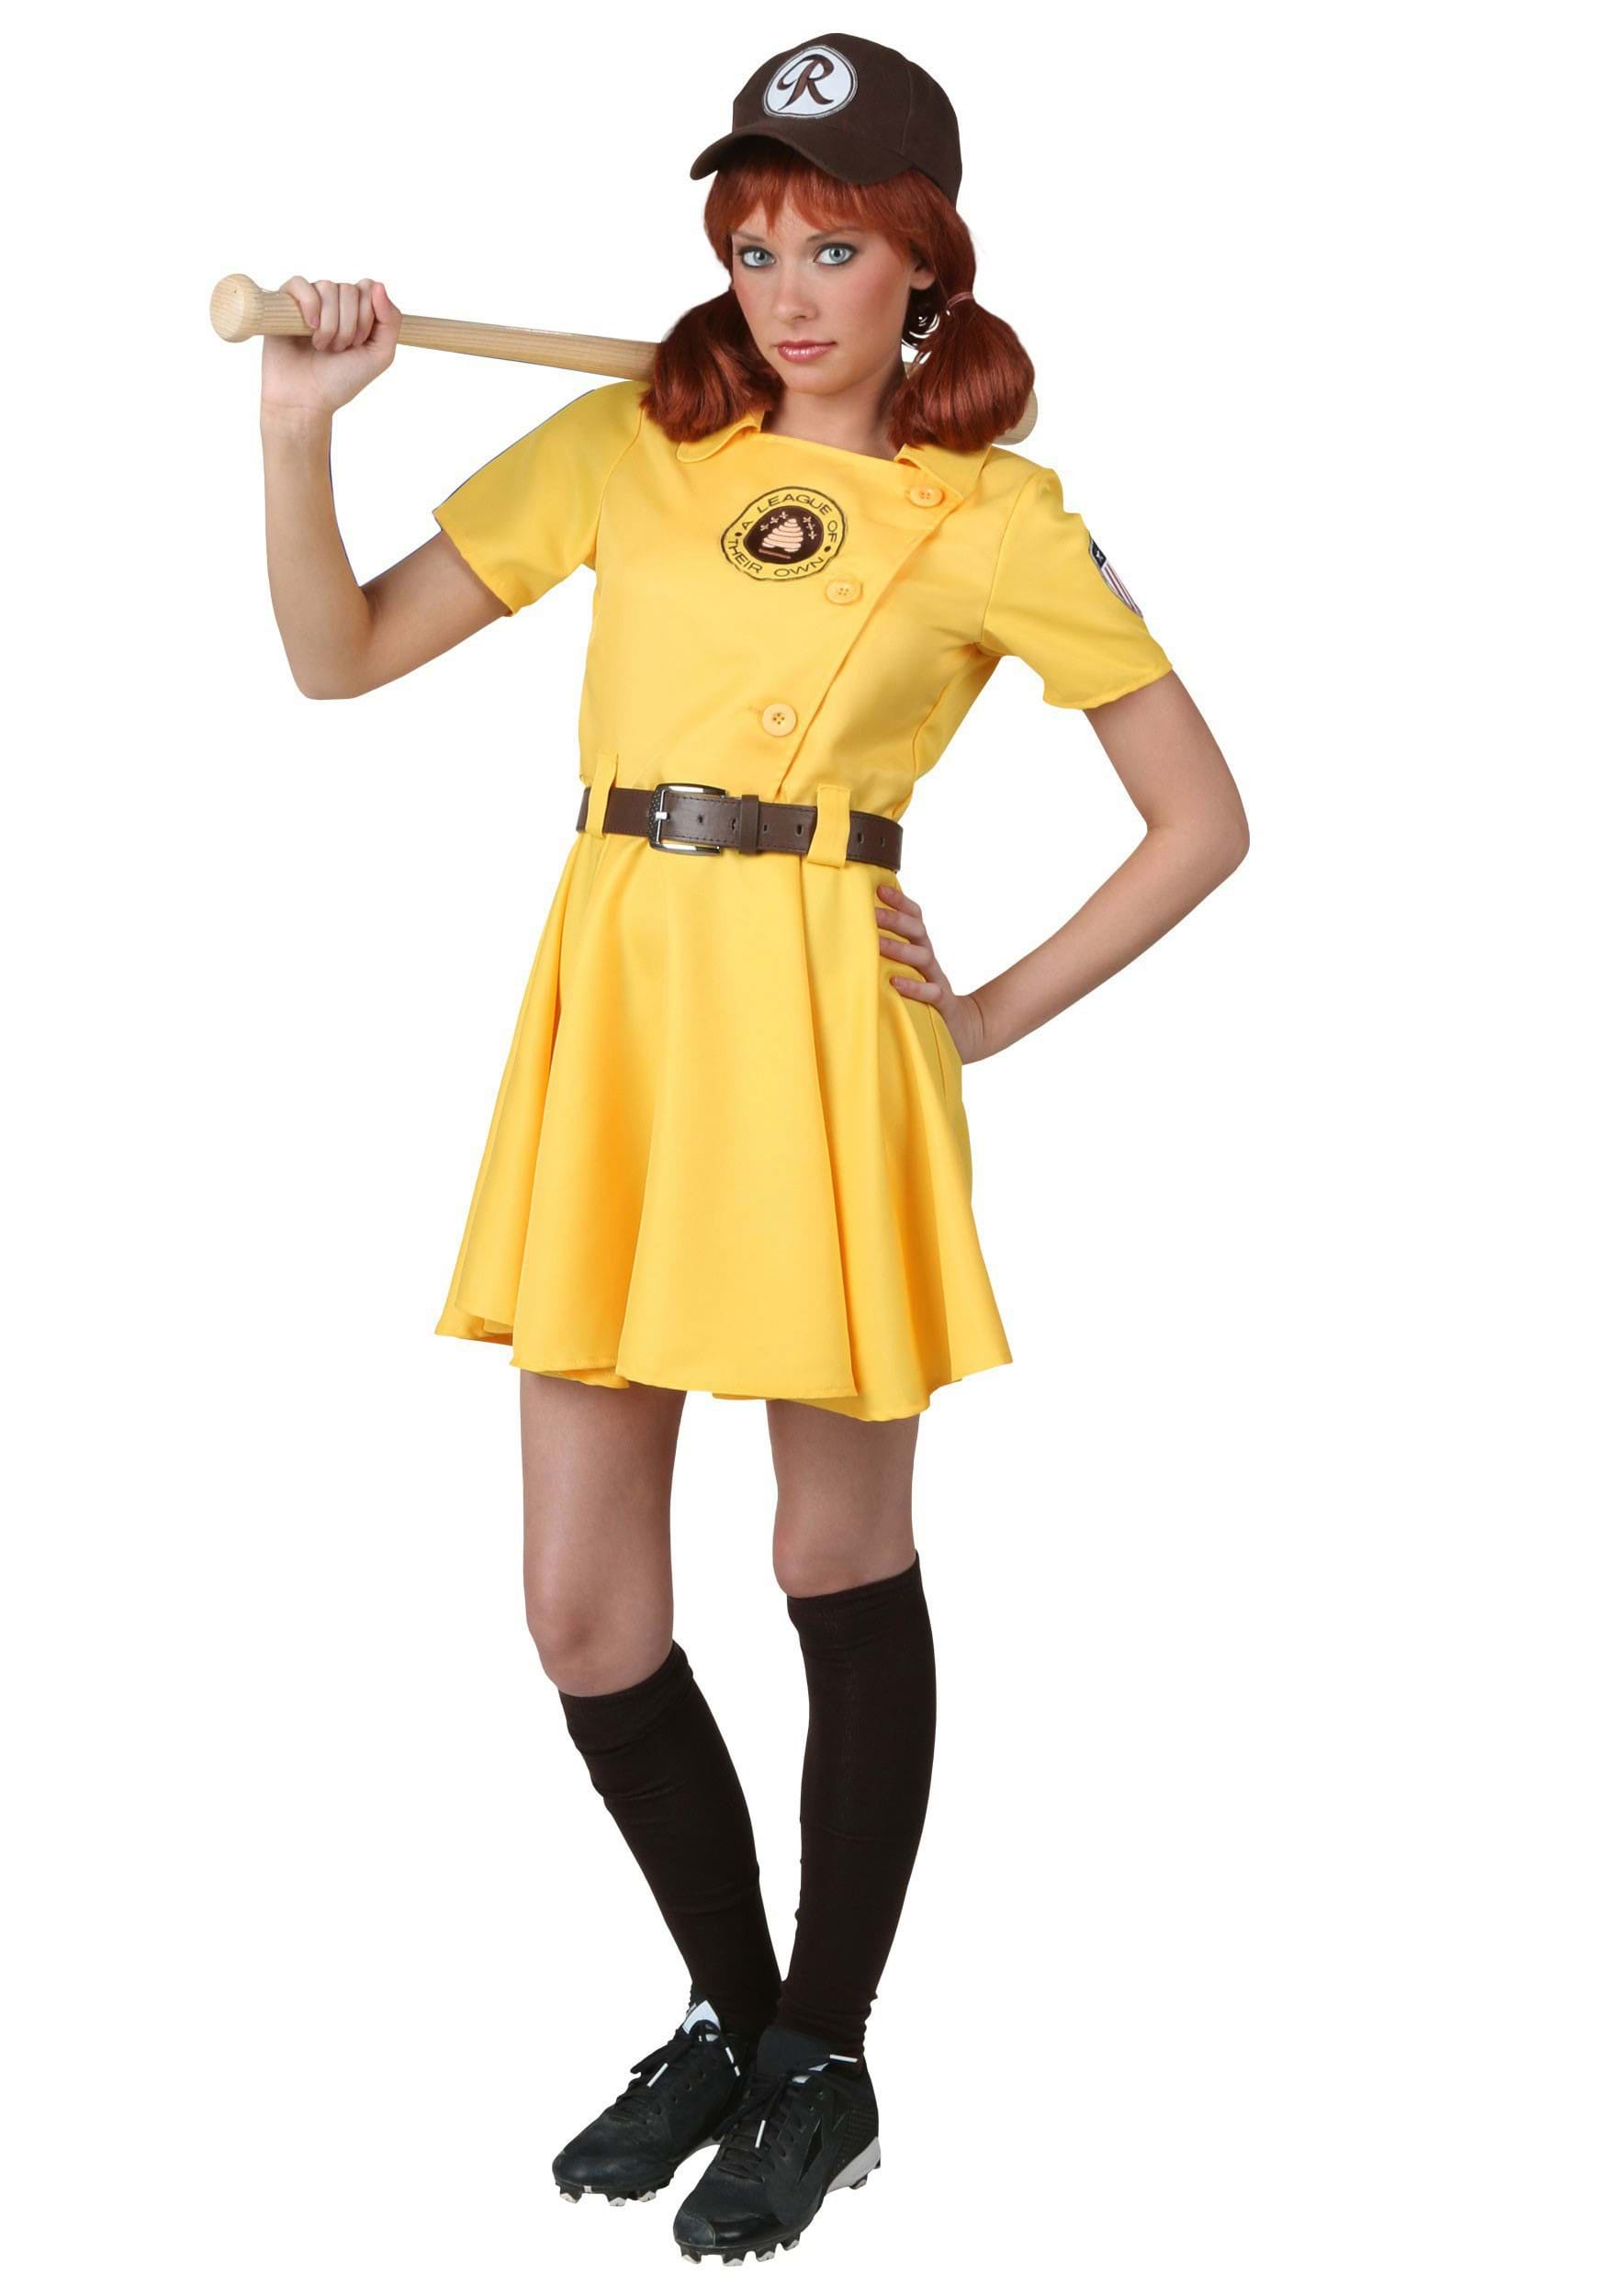 Women's Plus Size A League Of Their Own Kit Fancy Dress Costume , Exclusive Fancy Dress Costumes